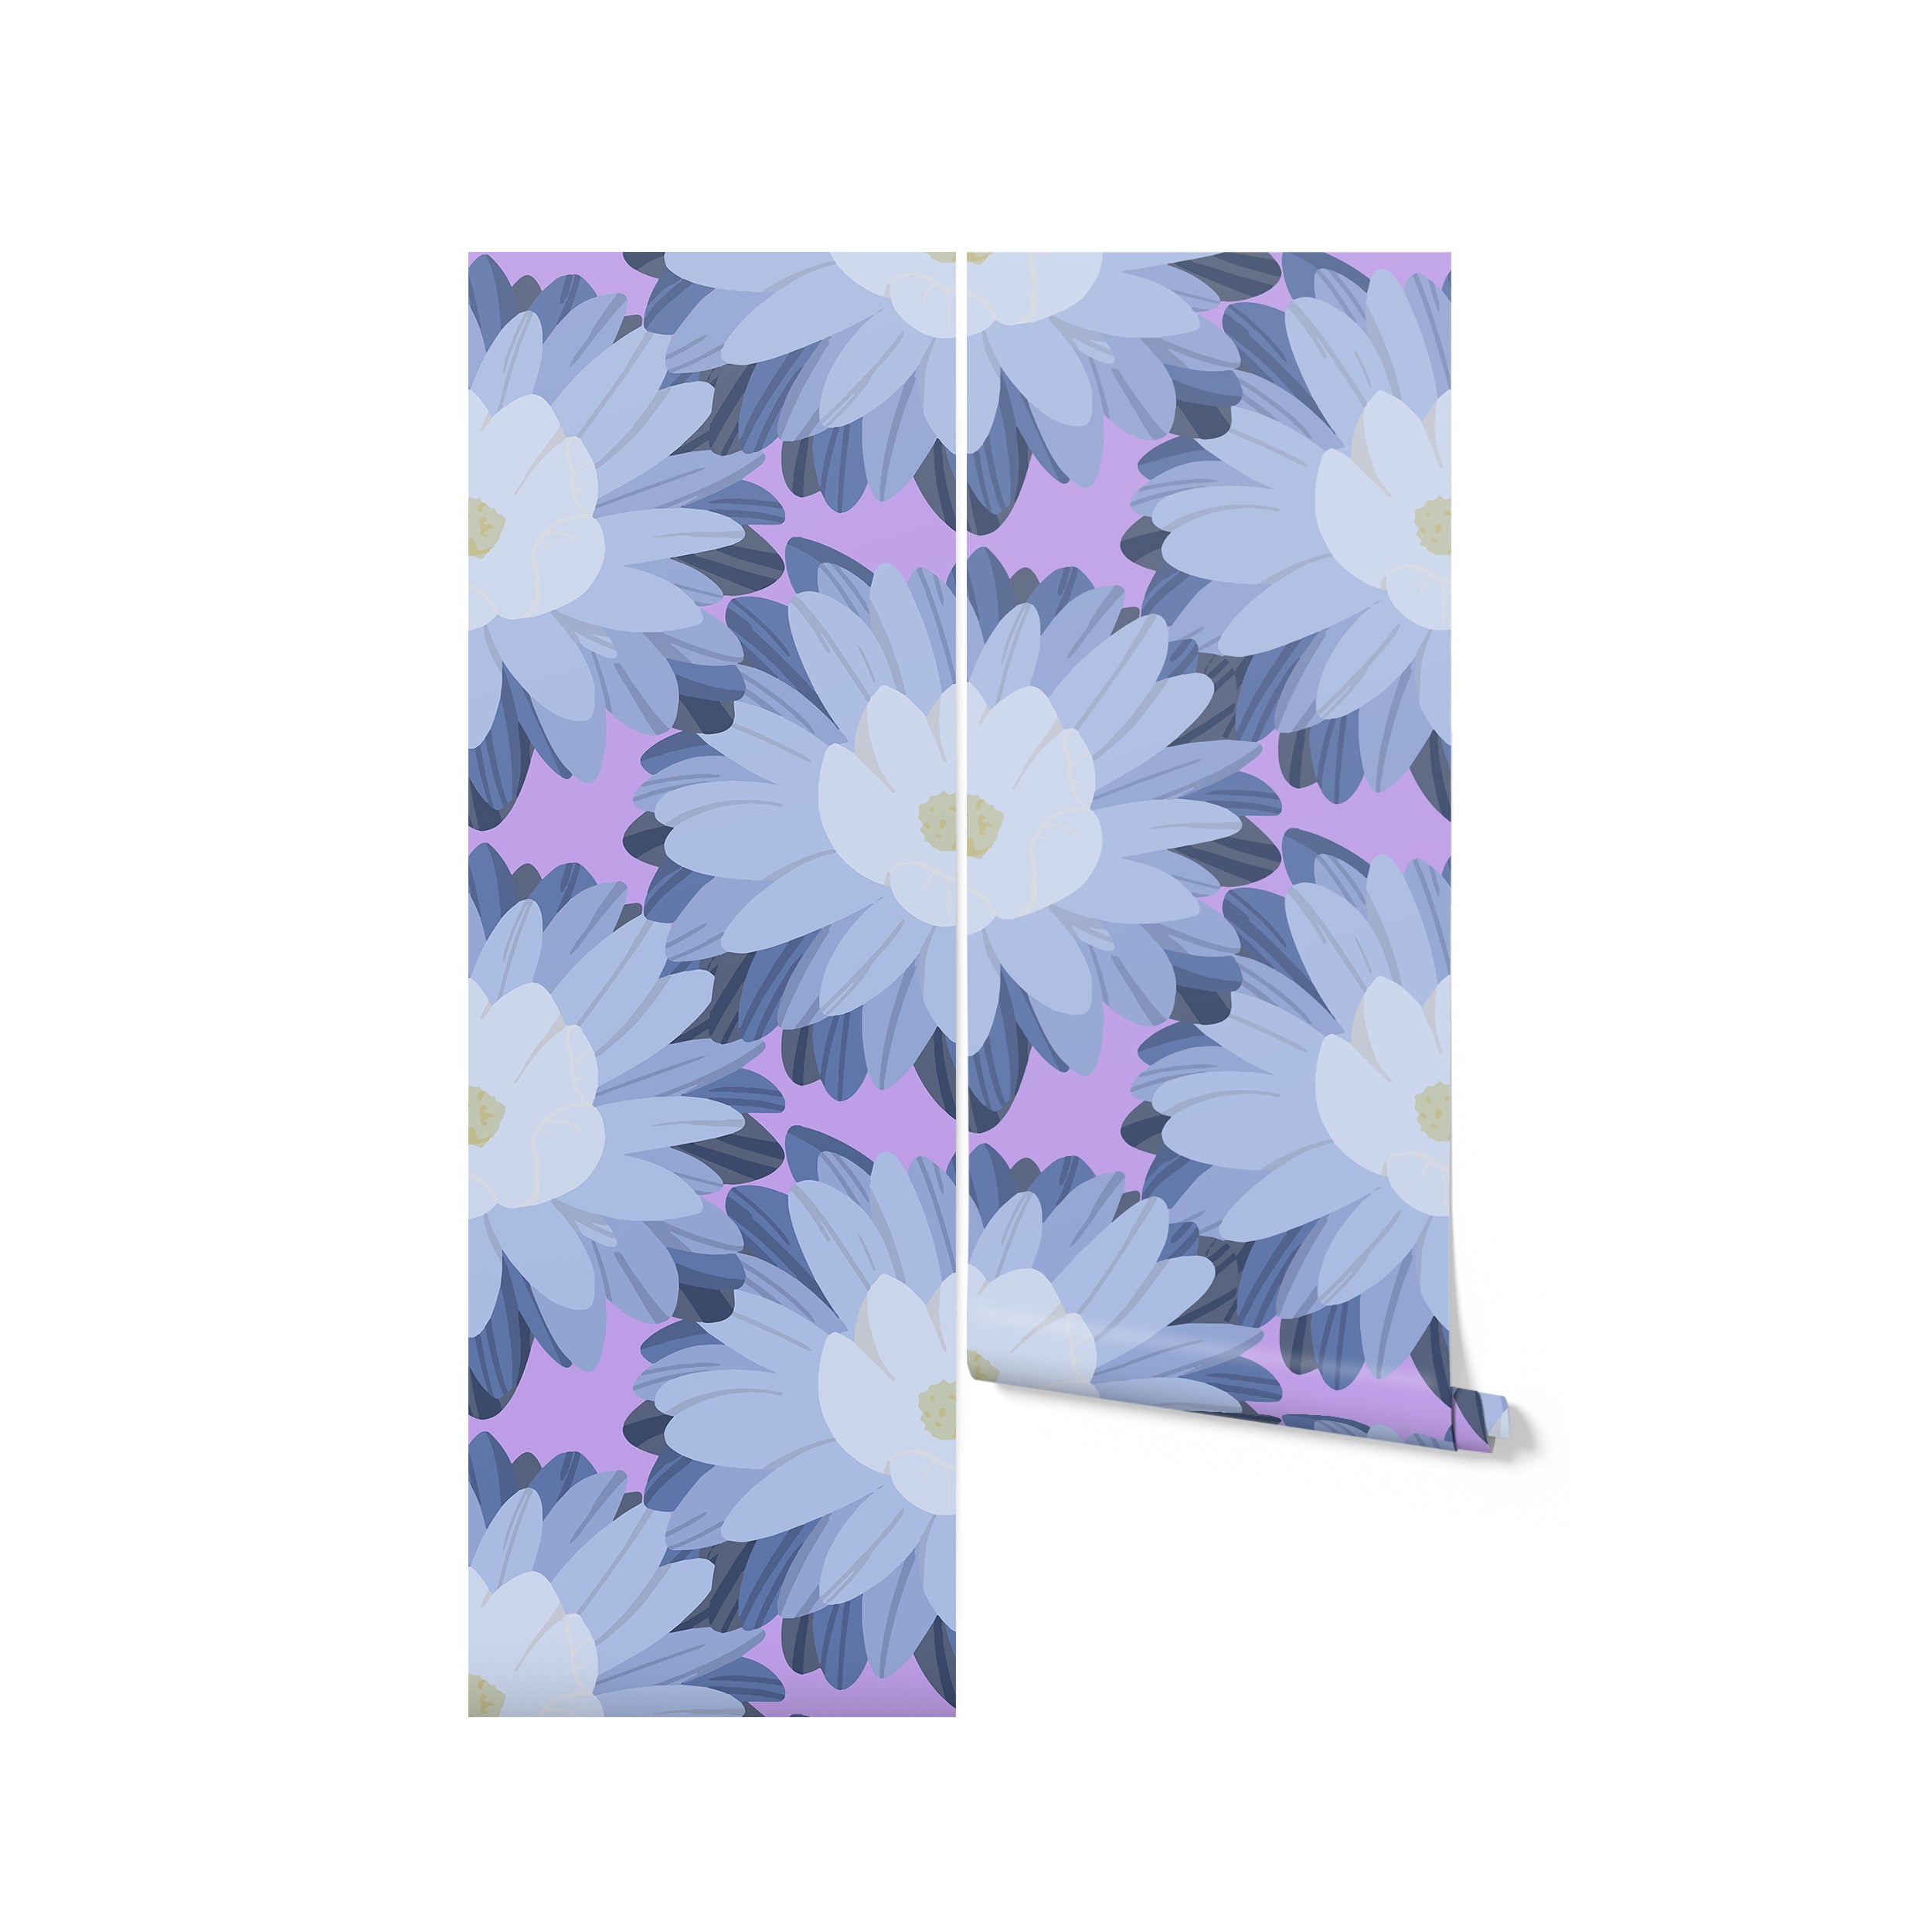 Rolled up Funky Floral Wallpaper with pastel blue and pink flower pattern